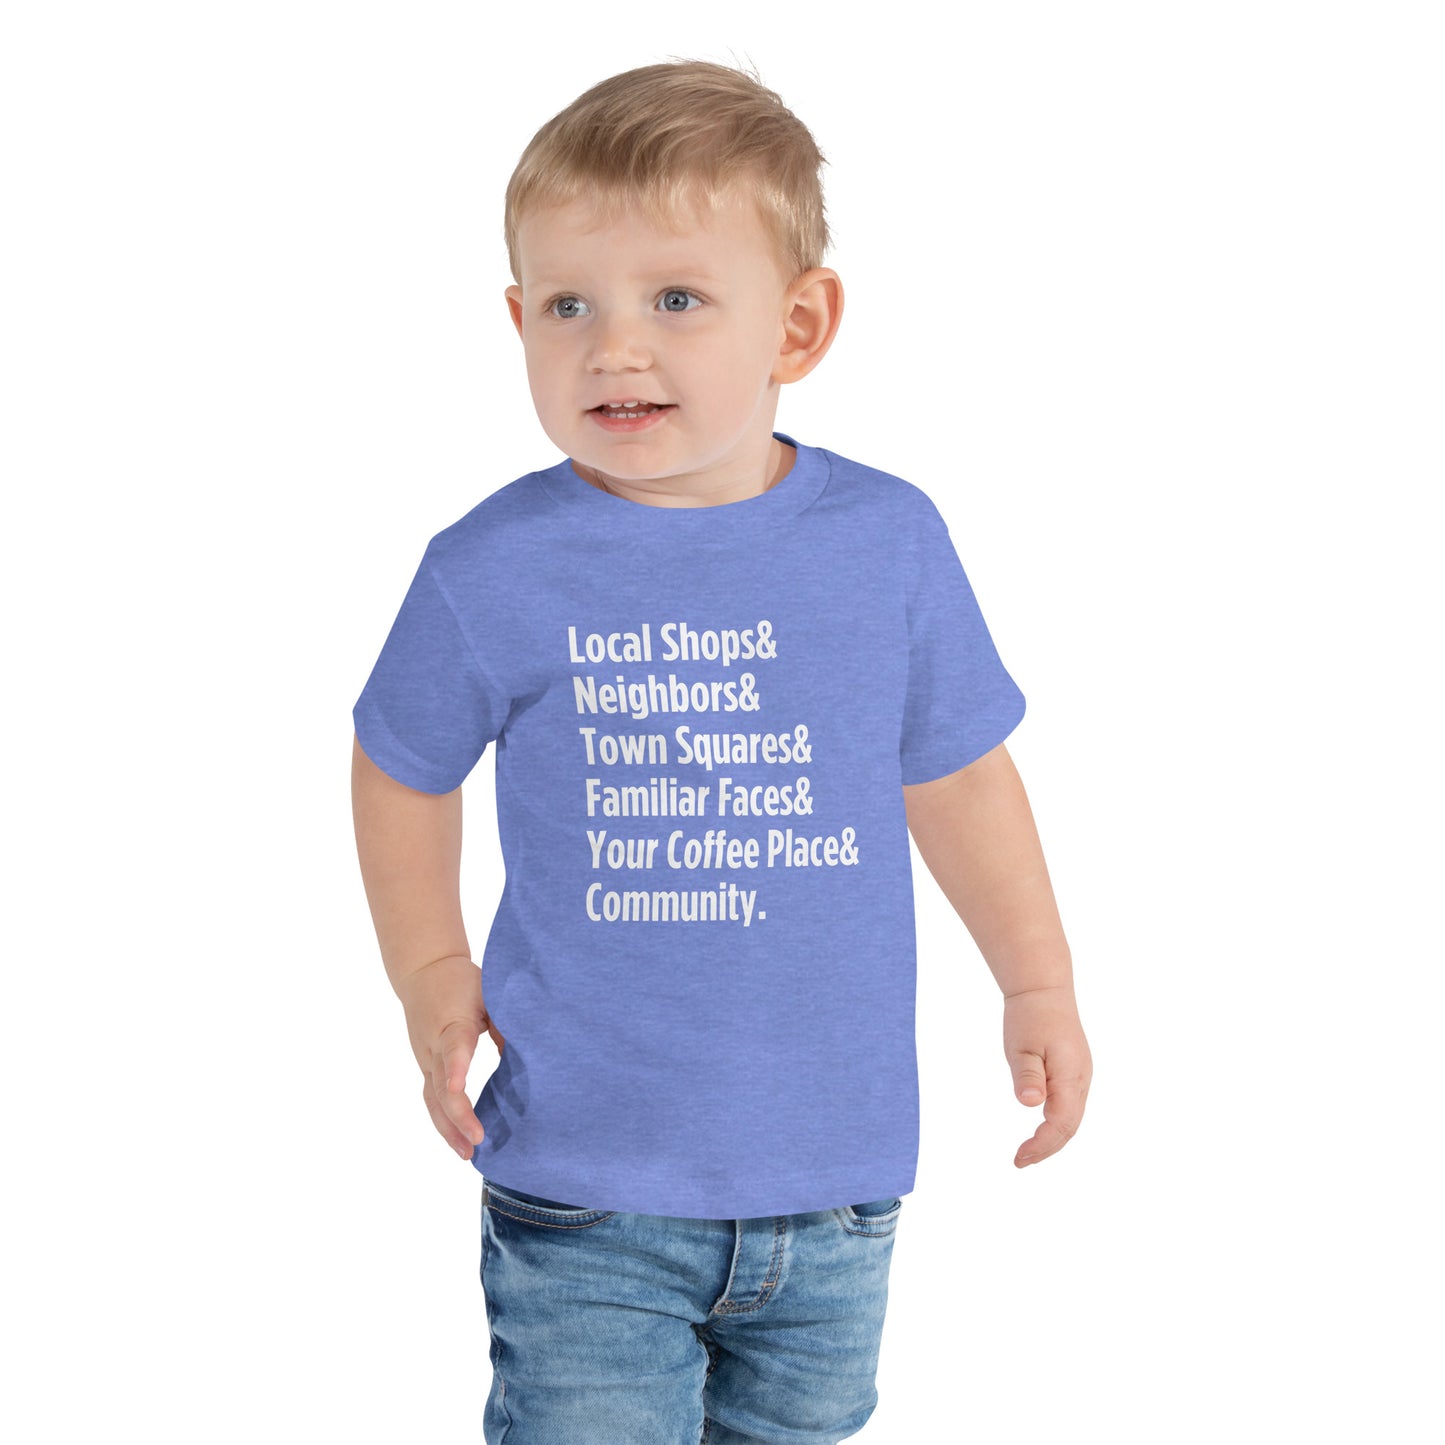 "Only on Main Street" (Community) Toddler Short Sleeve Tee